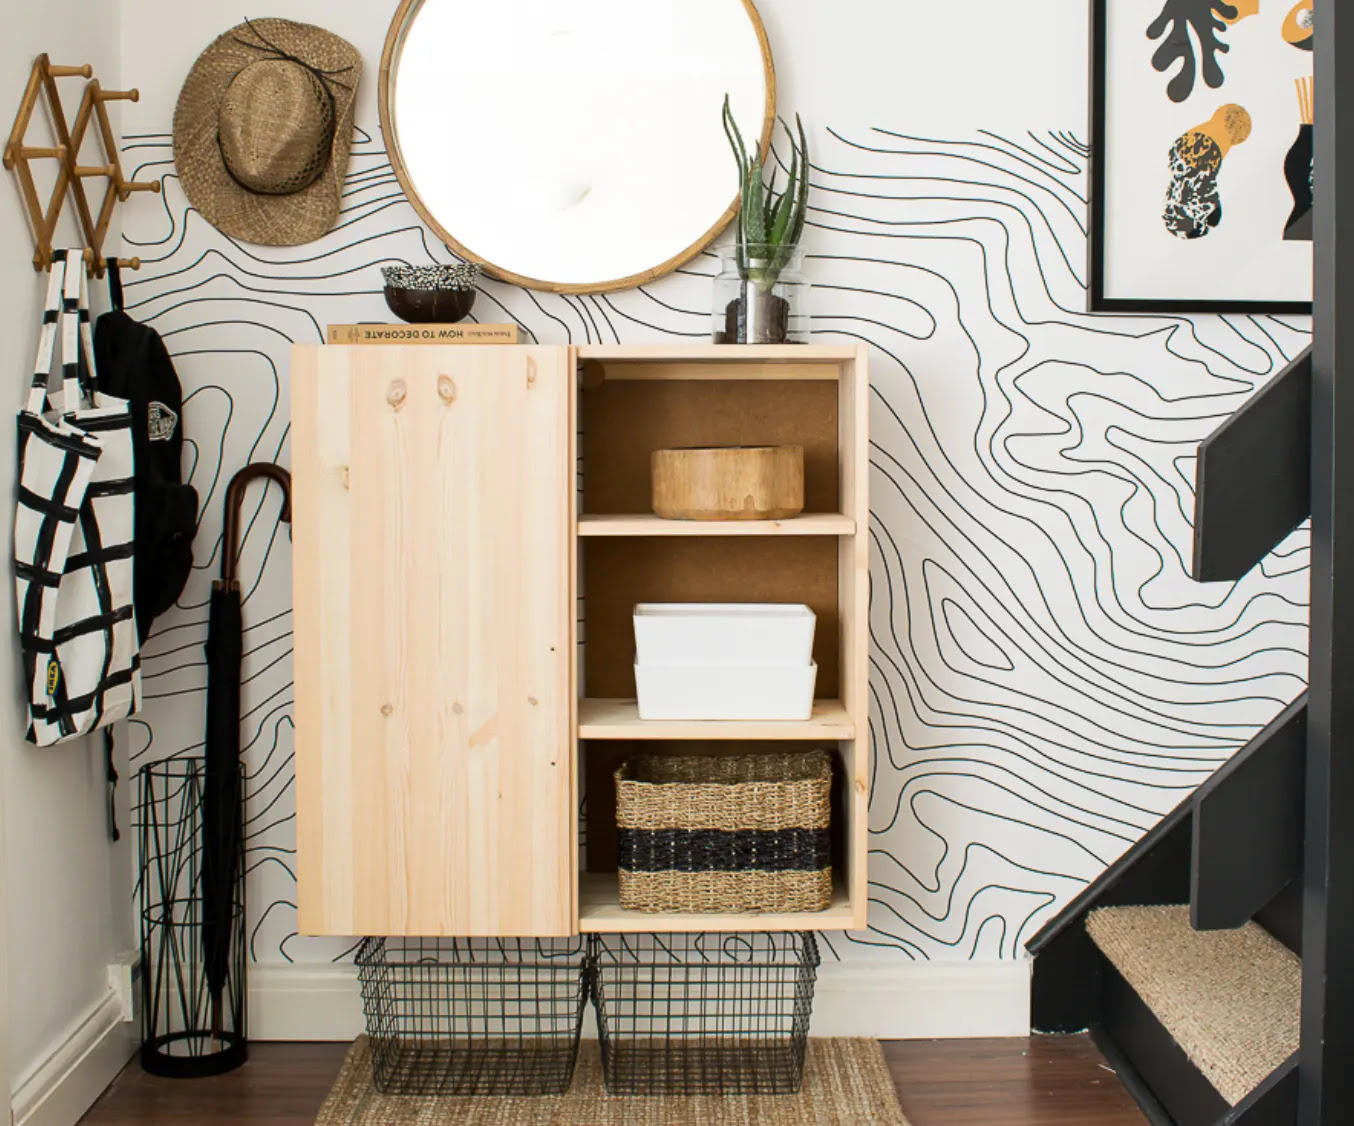 Small Entryway Storage Ideas – 10 Chic And Practical Ways To Make The Most Of A Tight Space